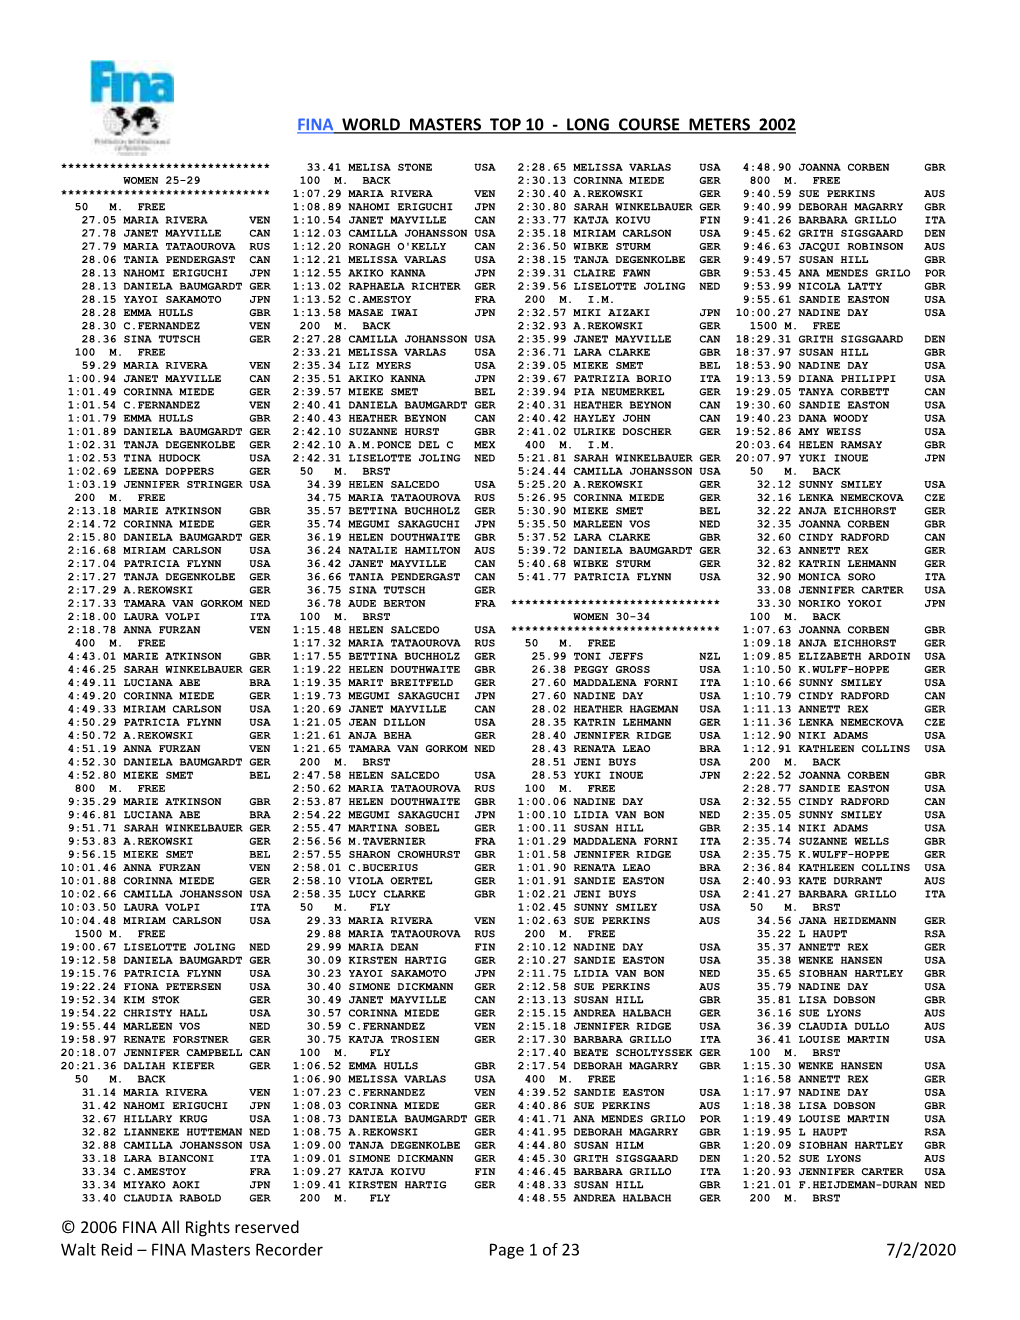 FINA Masters Recorder Page 1 of 23 7/2/2020